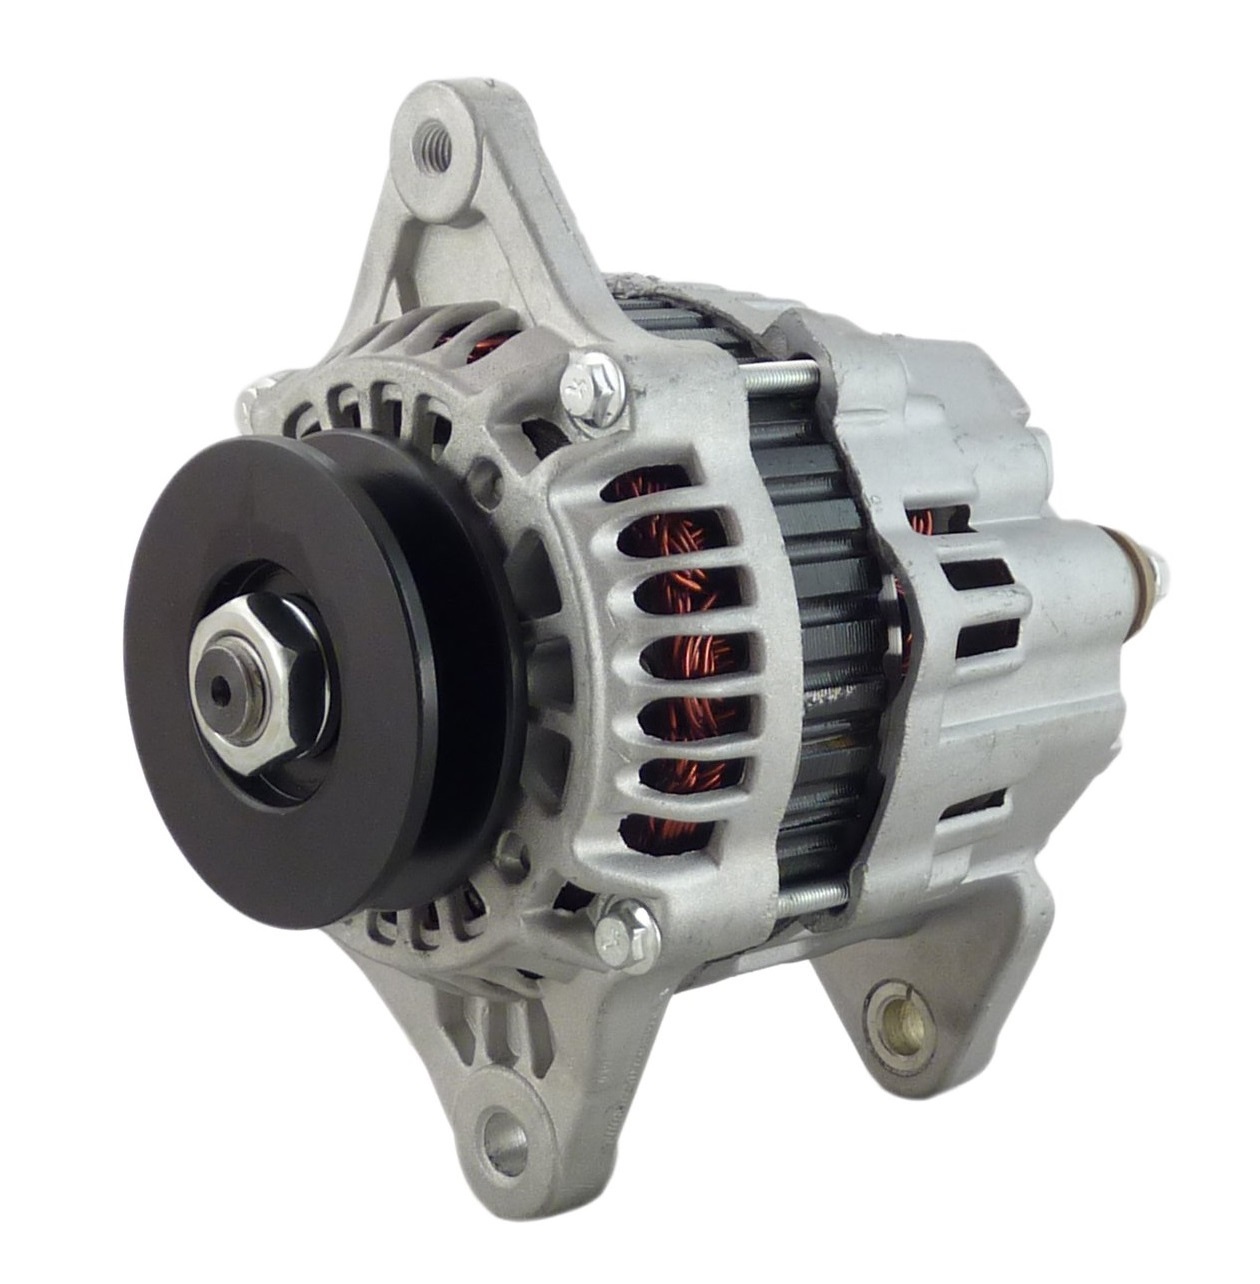 Forklift Alternator for Hyster A7T03277 A7T03277A A7TA2283 7000215 1361853 1450928 3068342 3123908 800045600 S5SN-18-300 S5SN-18-300A 00591-33580-81 00591-55973-81 1500145-04 2690027-70 5059605-6